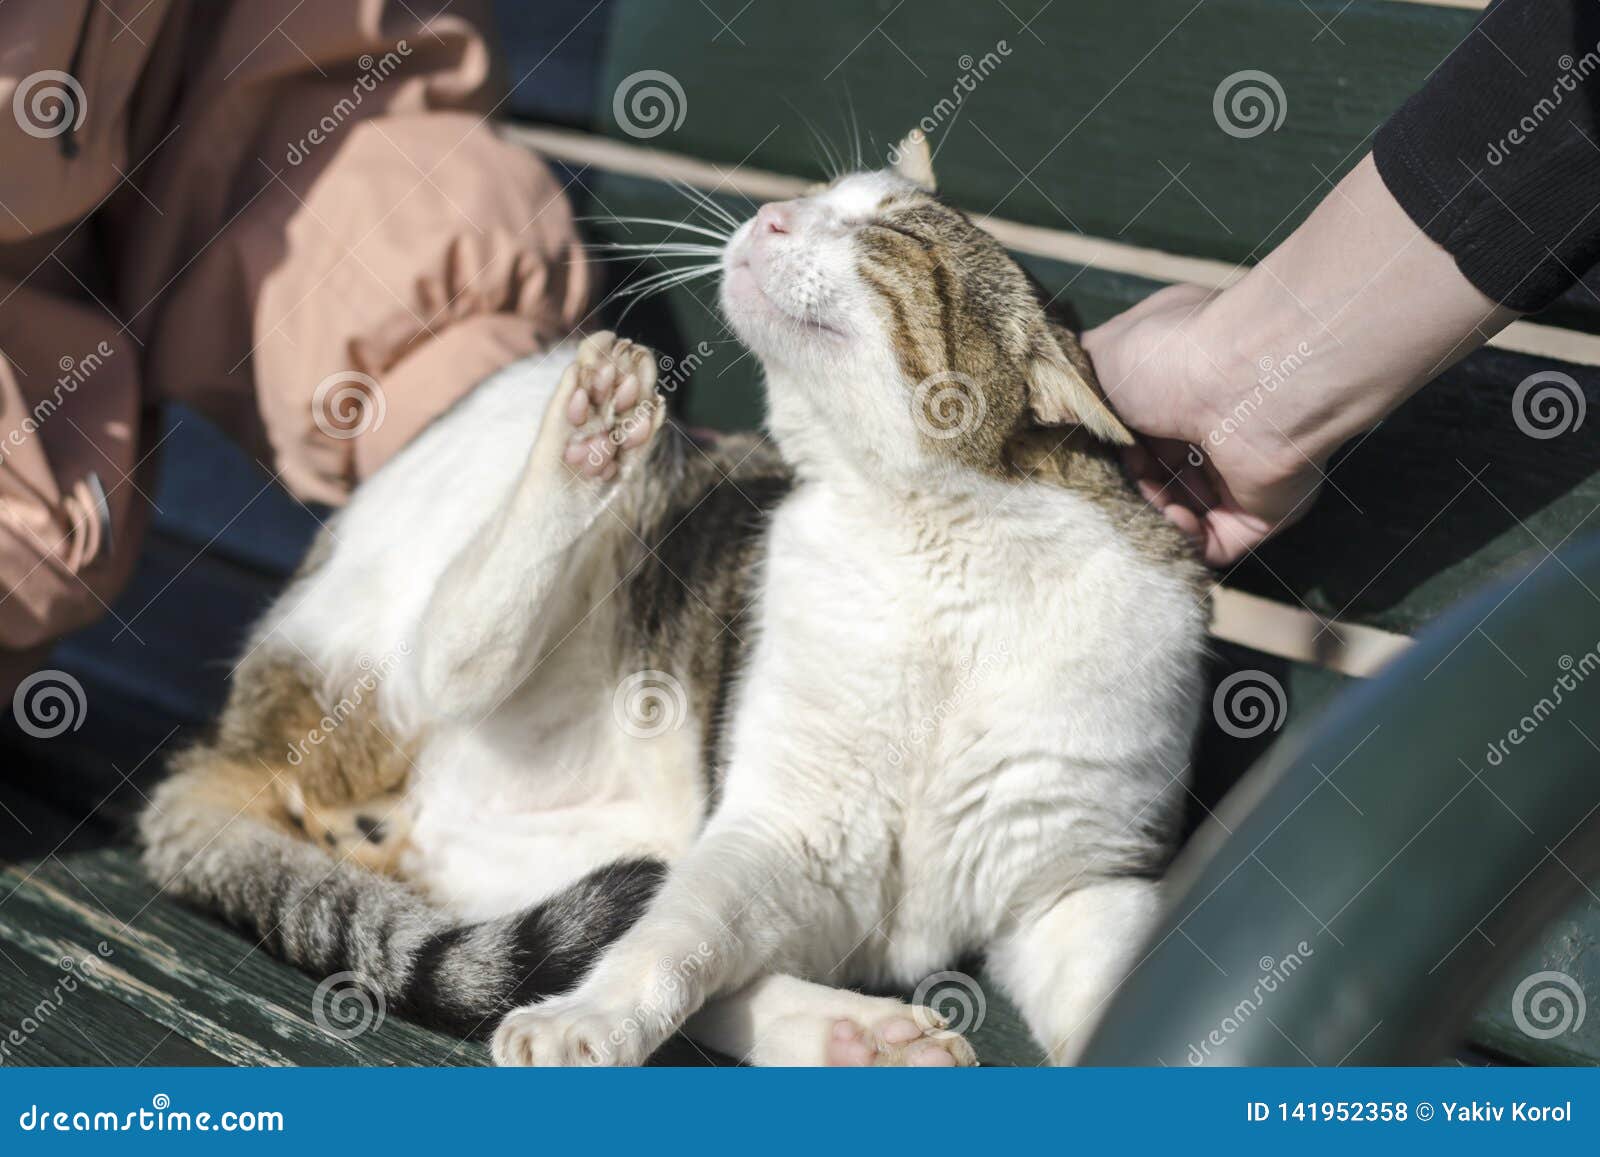 A Yellowwhite Stray Cat Sits On A Bench And An Elderly Woman And A